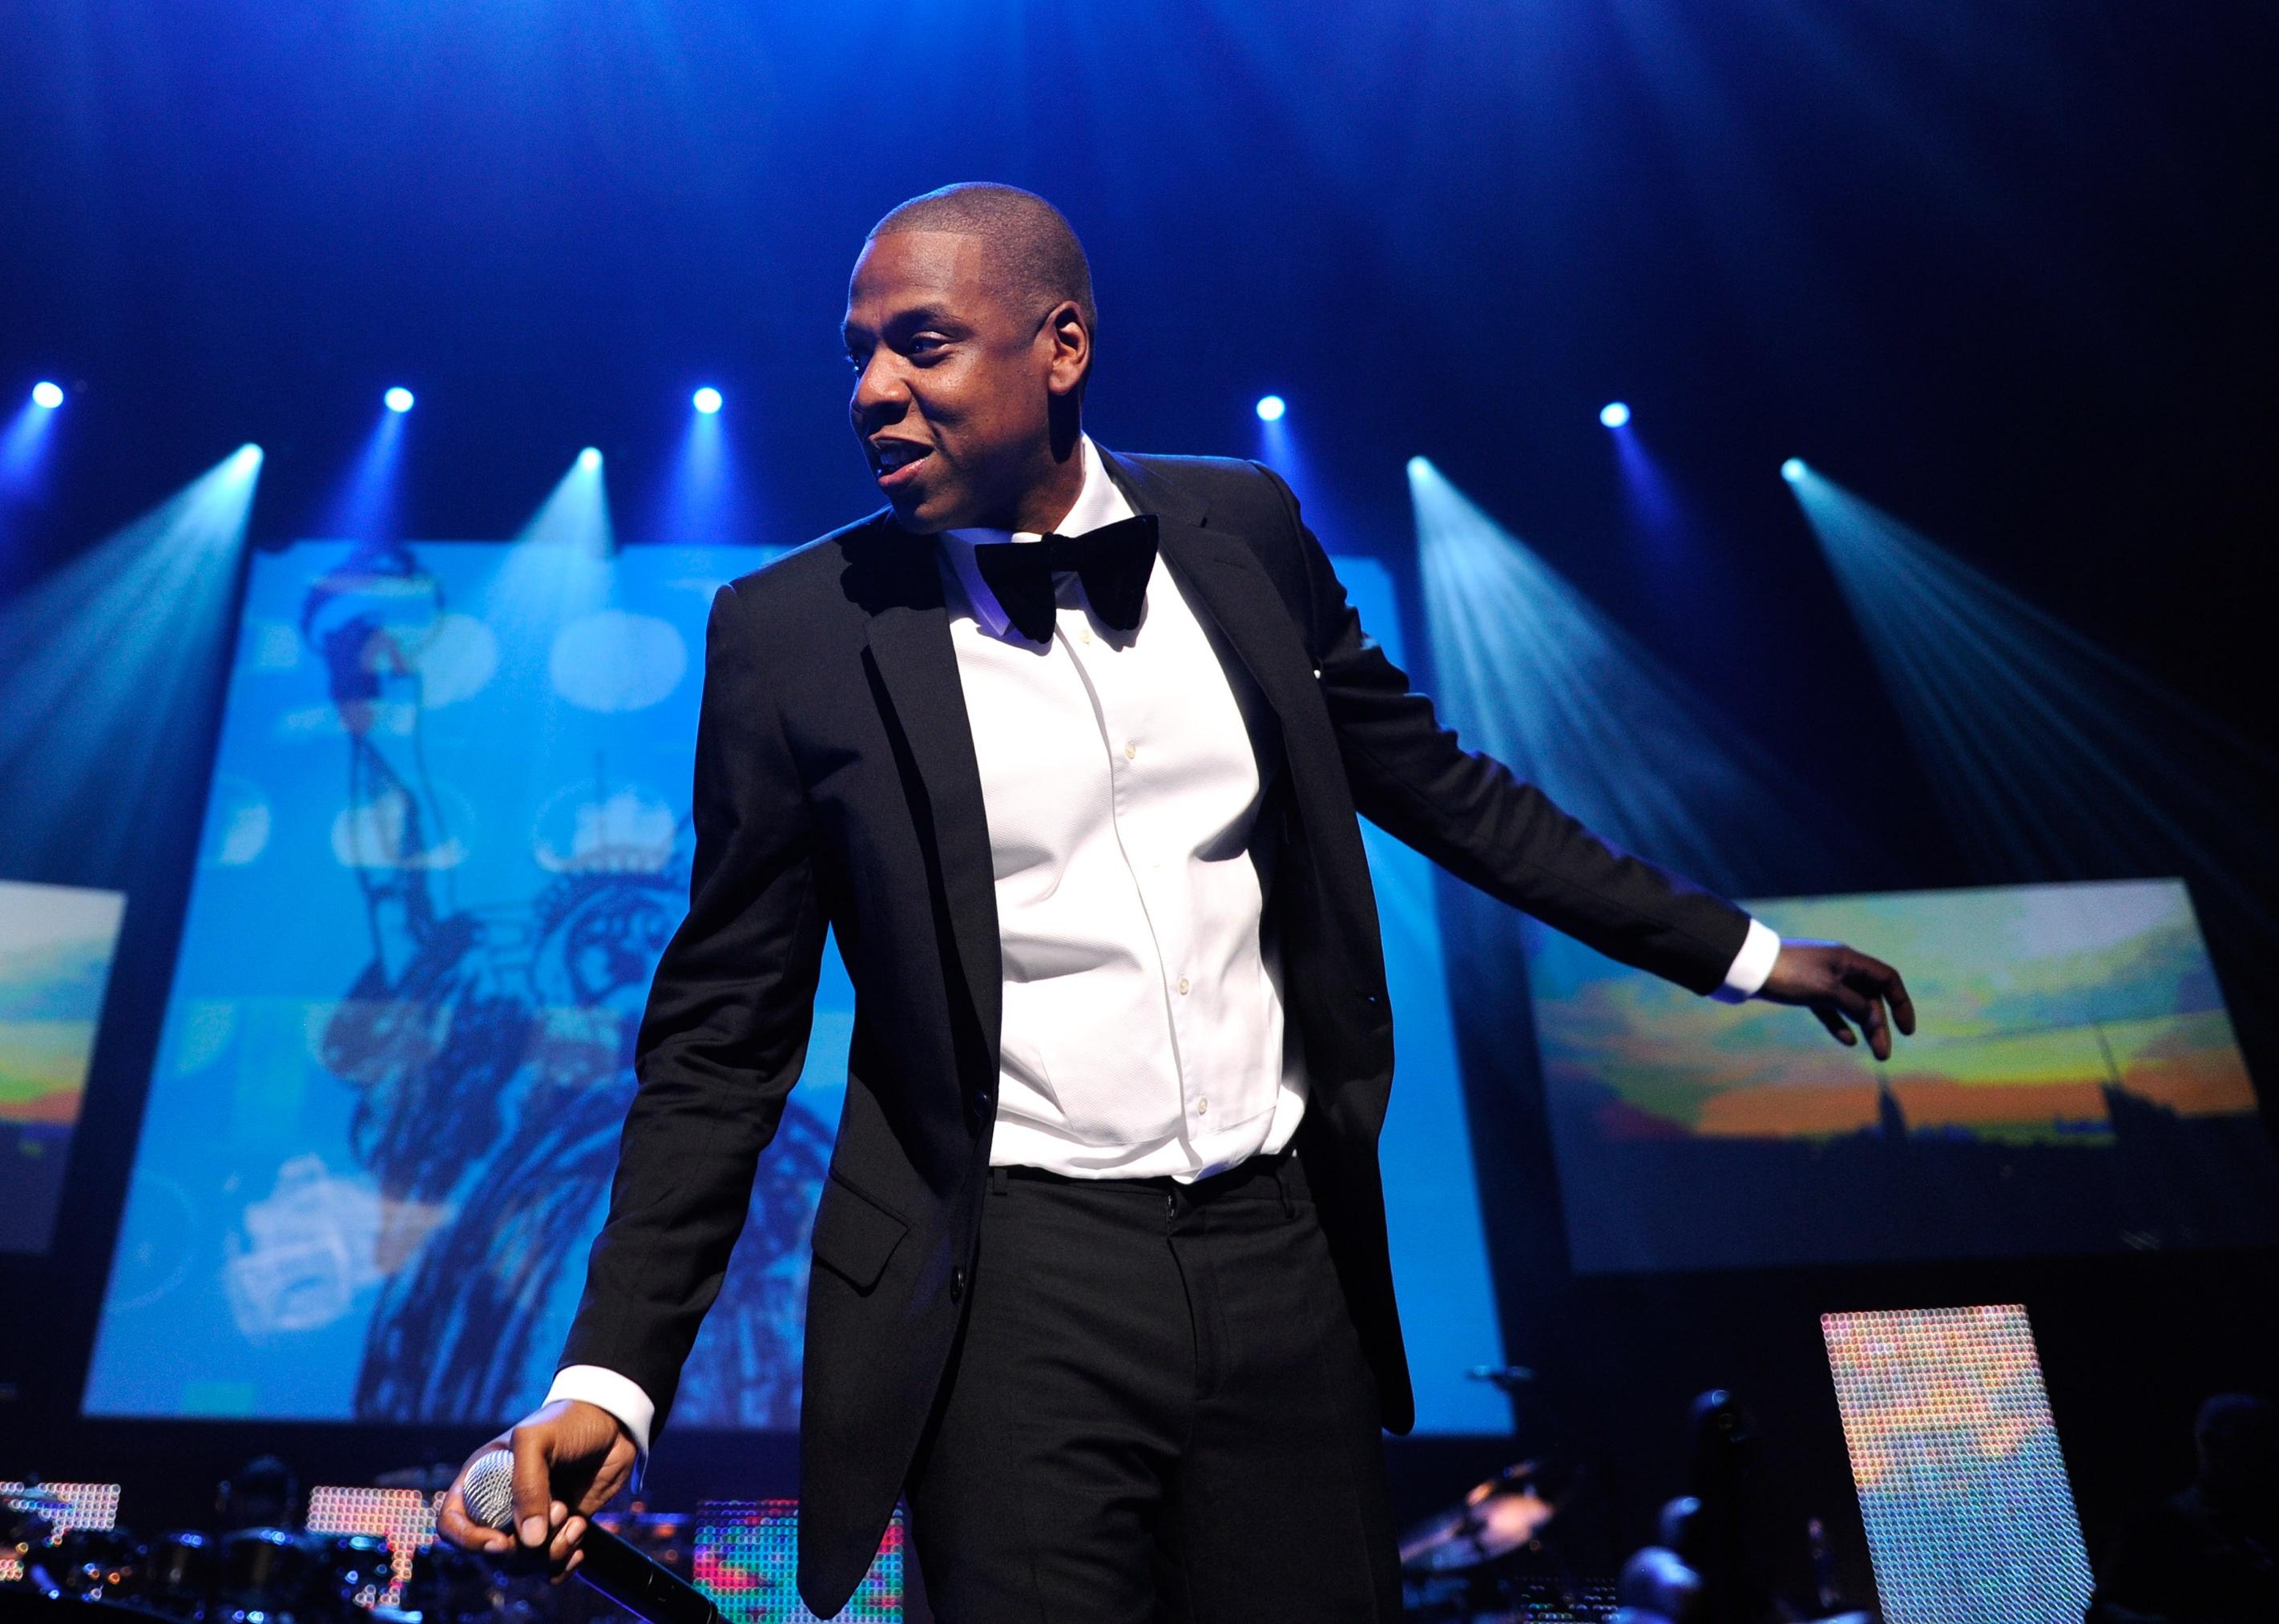 Jay-Z performs on stage during Keep A Child Alive's 7th annual Black Ball.